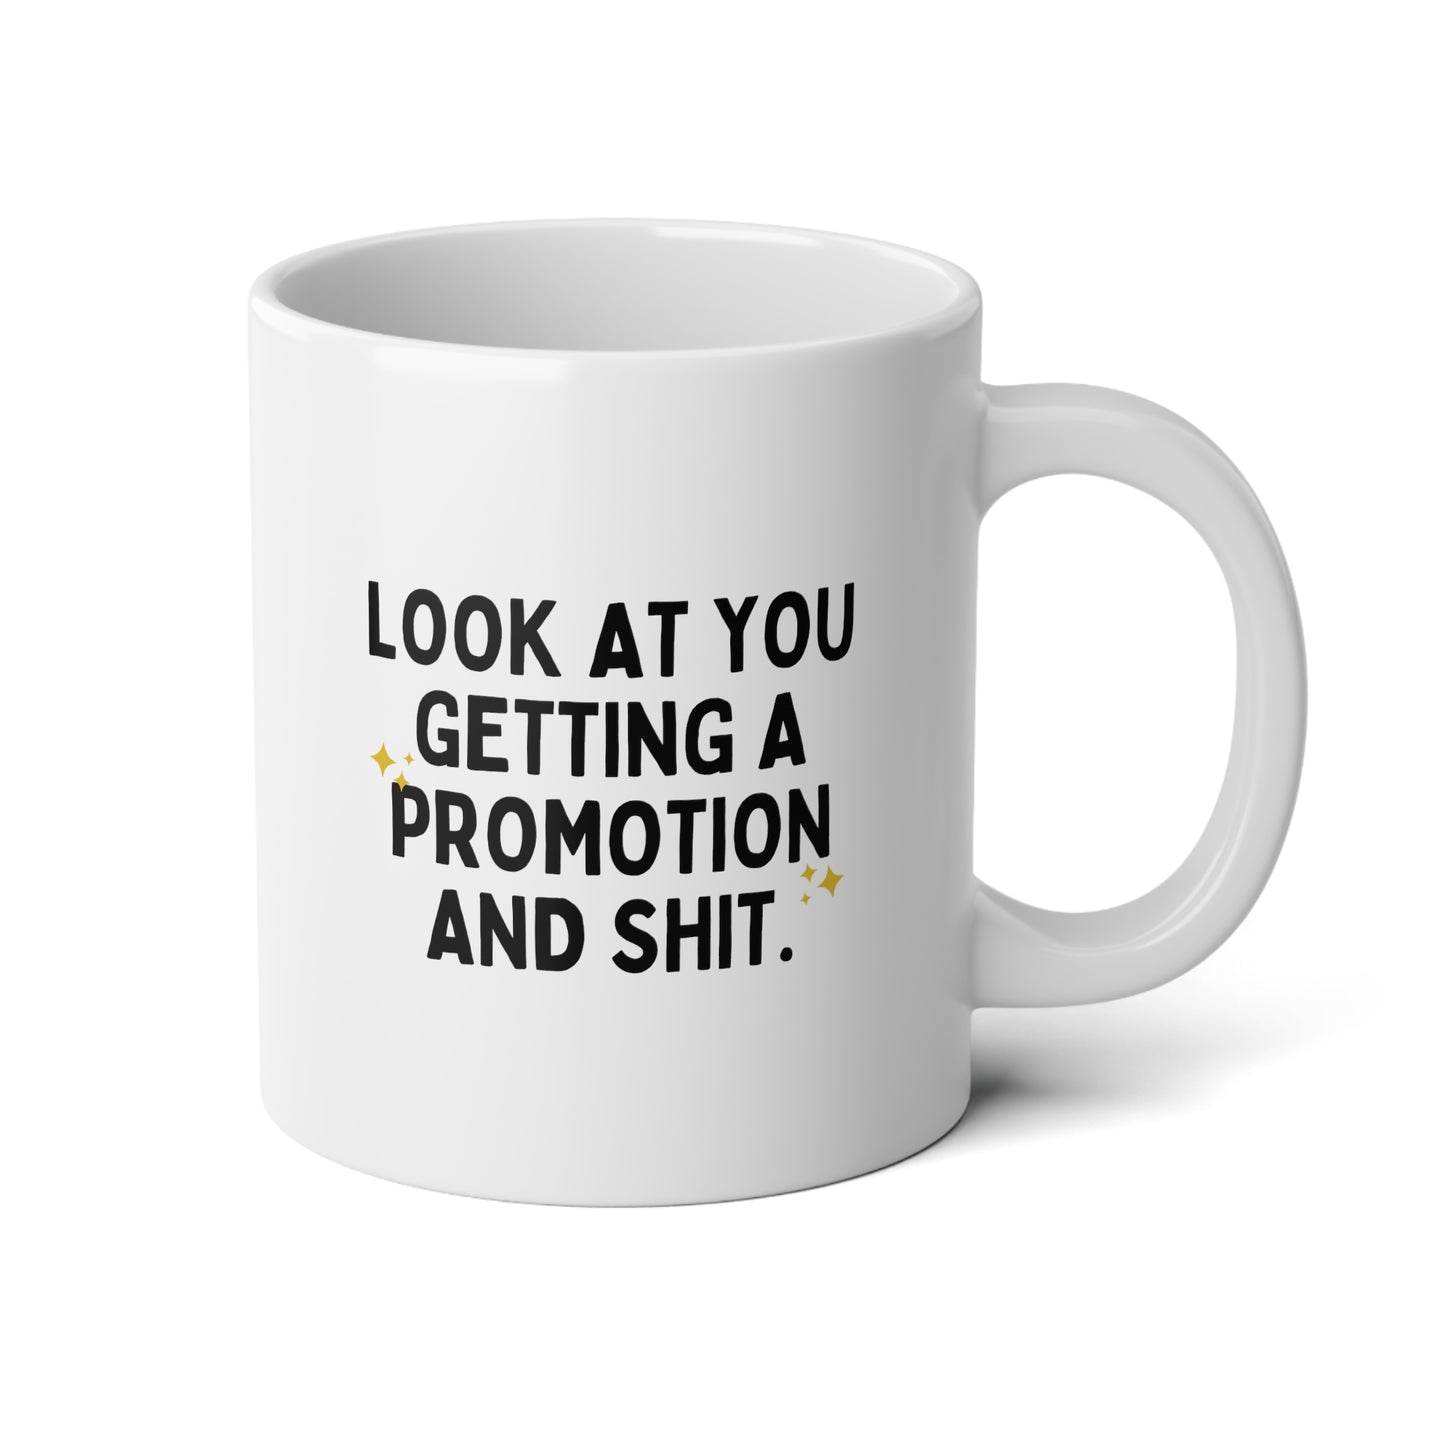 Look At You Getting A Promotion And Shit 20oz white funny large coffee mug gift for women men promoted coworker colleague congratulations wavey wares wavywares wavy wares